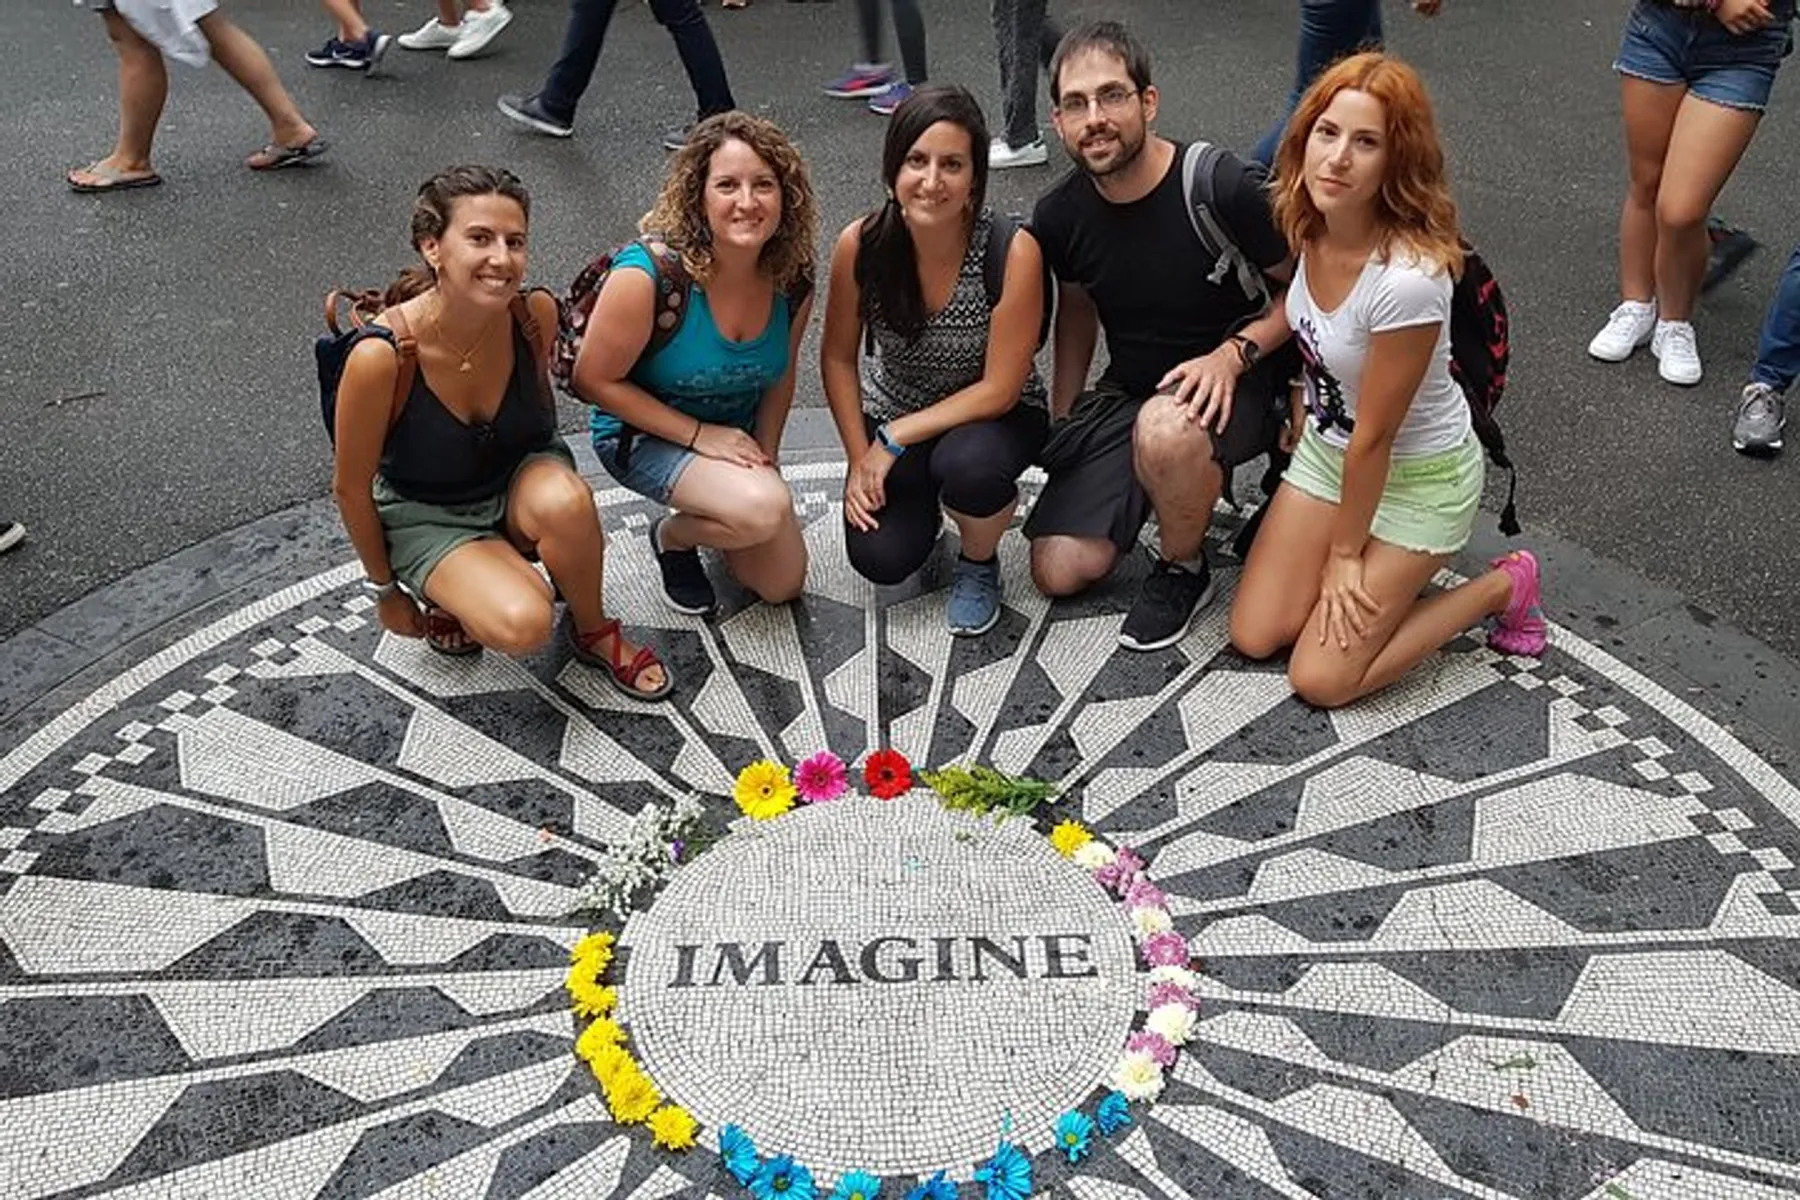 Five individuals are posing for a photo around the iconic Imagine mosaic memorial in Central Park, New York City.